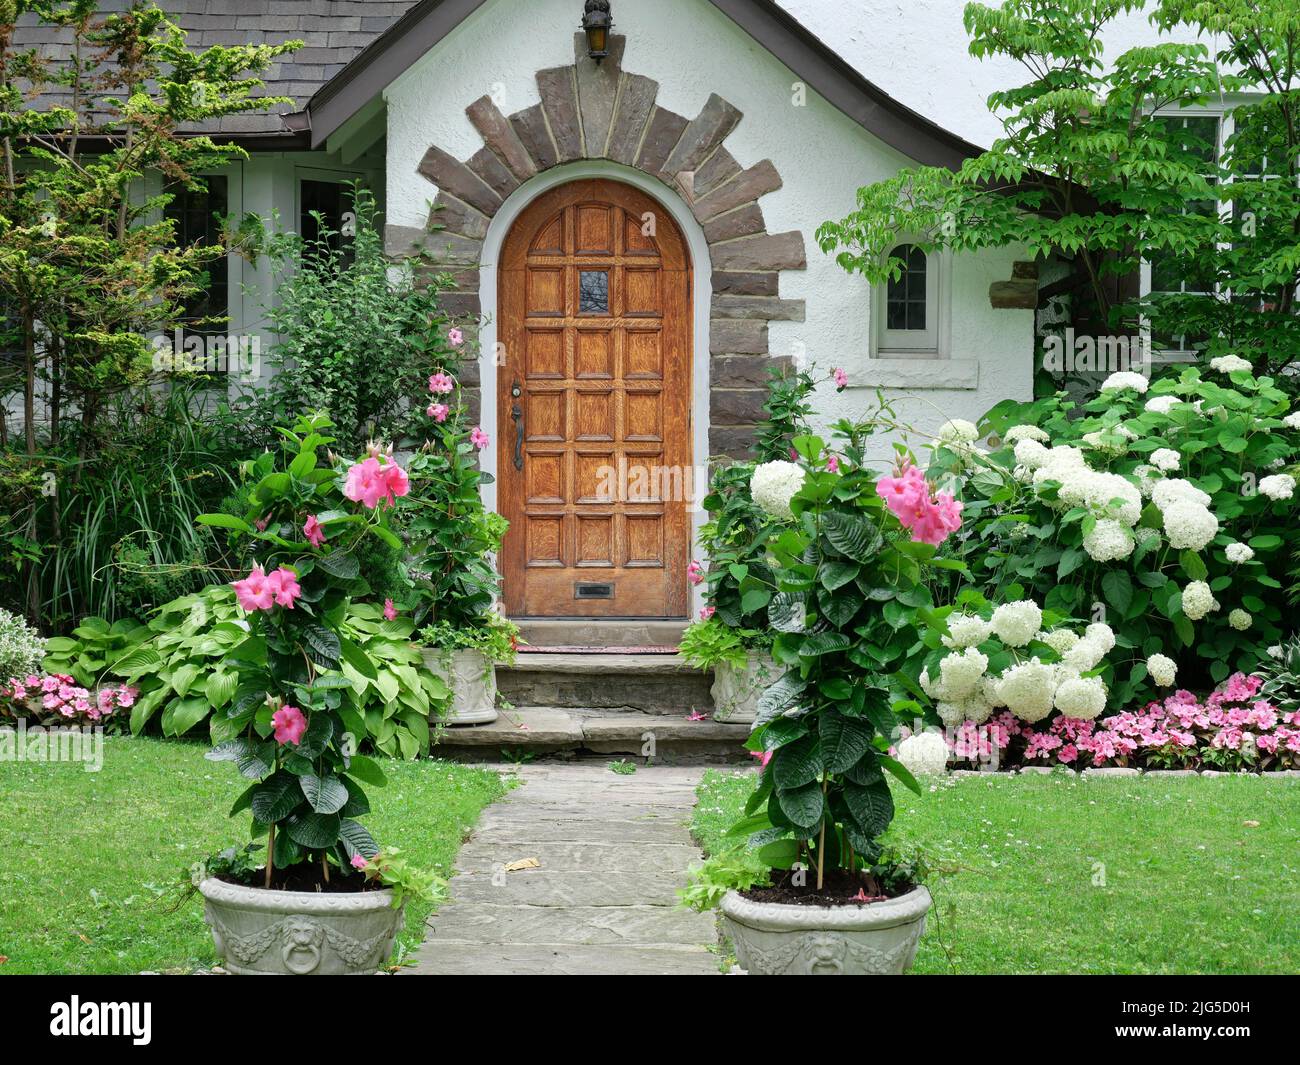 Older house with wood grain front door surrounded by flowers Stock Photo